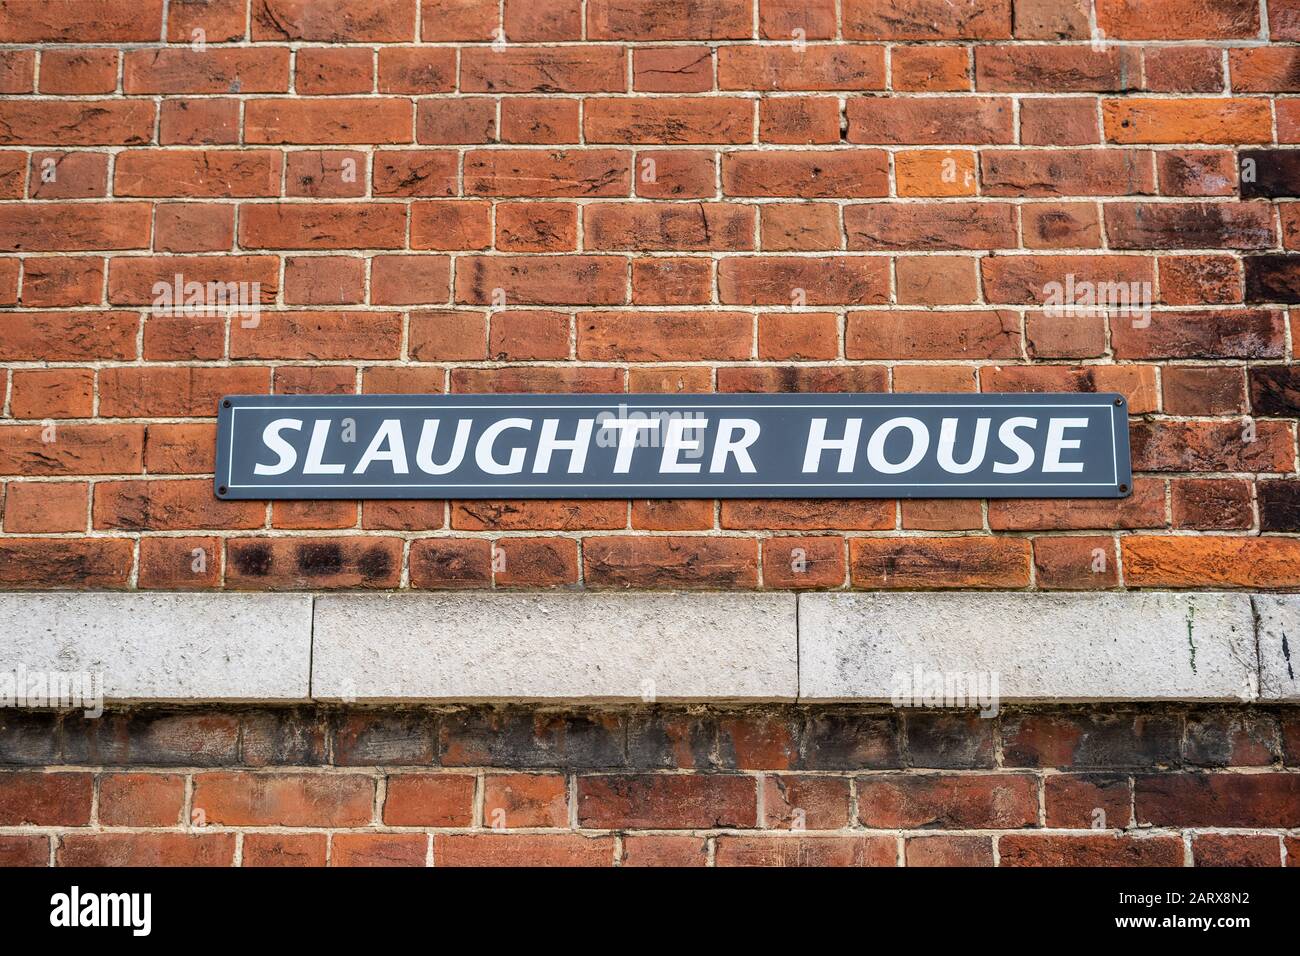 A Sign reading Slaughter house on a brick building Stock Photo